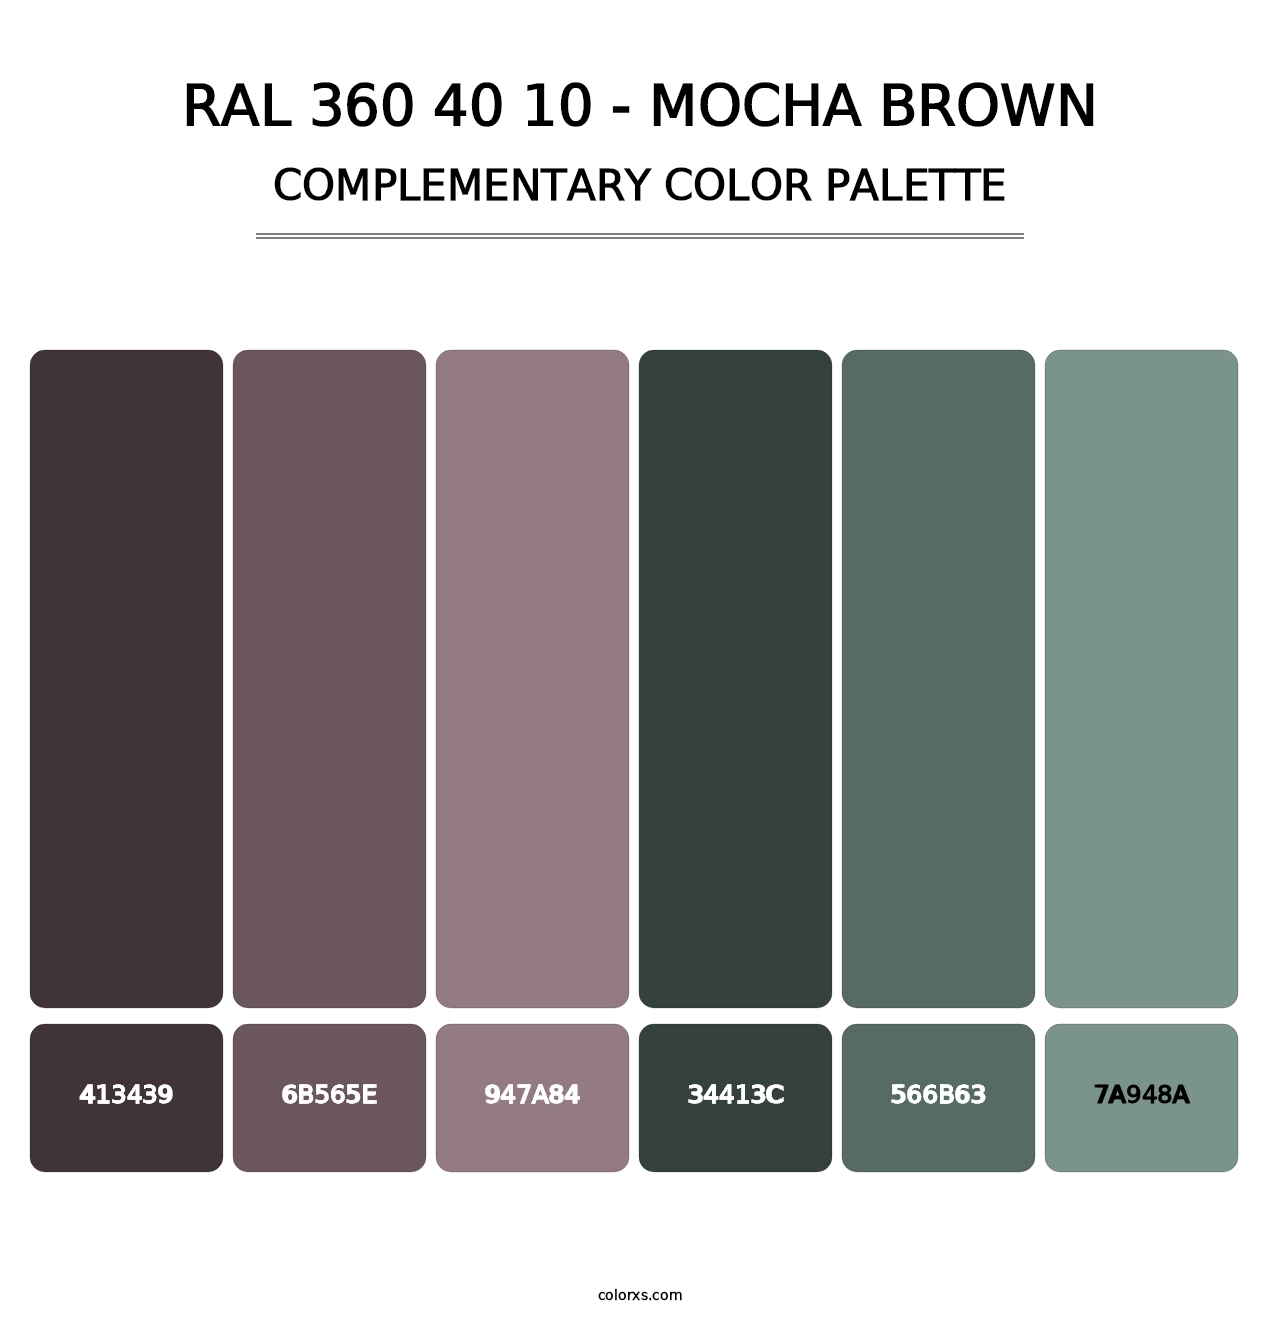 RAL 360 40 10 - Mocha Brown - Complementary Color Palette